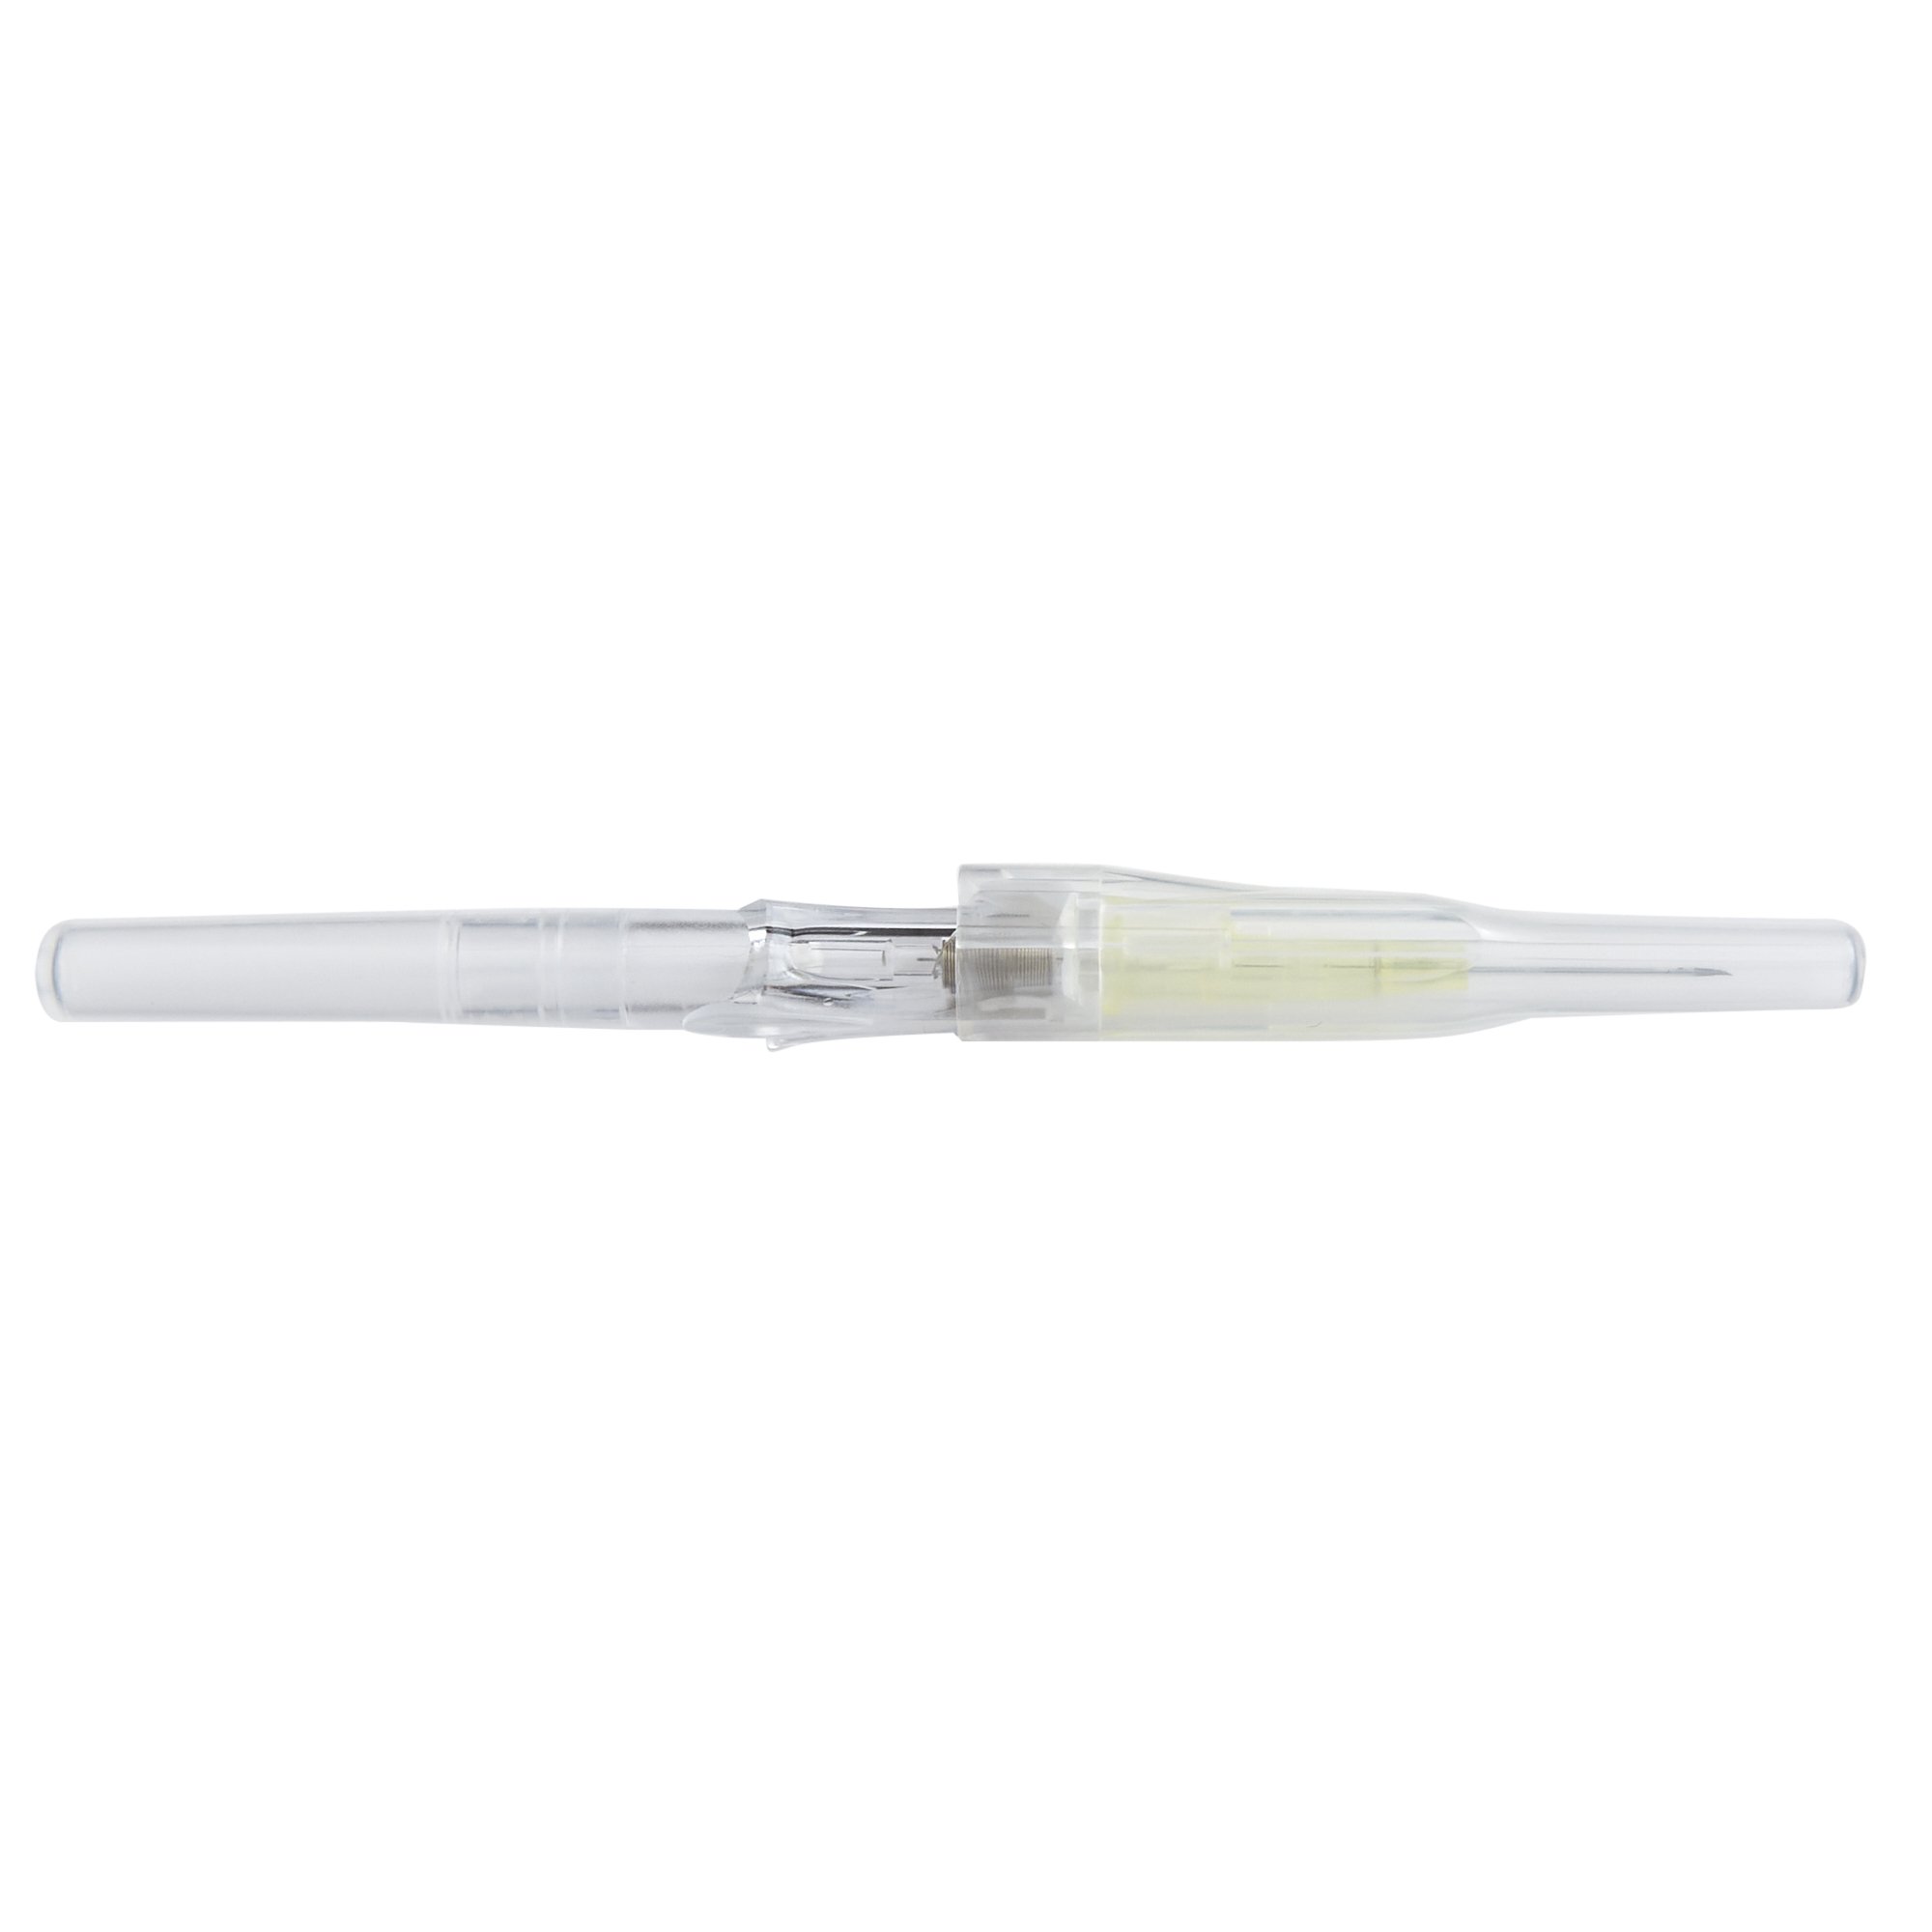 Catheters, Insyte Autoguard, BC Shielded 24 G x 3/4 Inch, Straight, Non-Winged, Button Retracting Needle, BD# 382512 50/Box